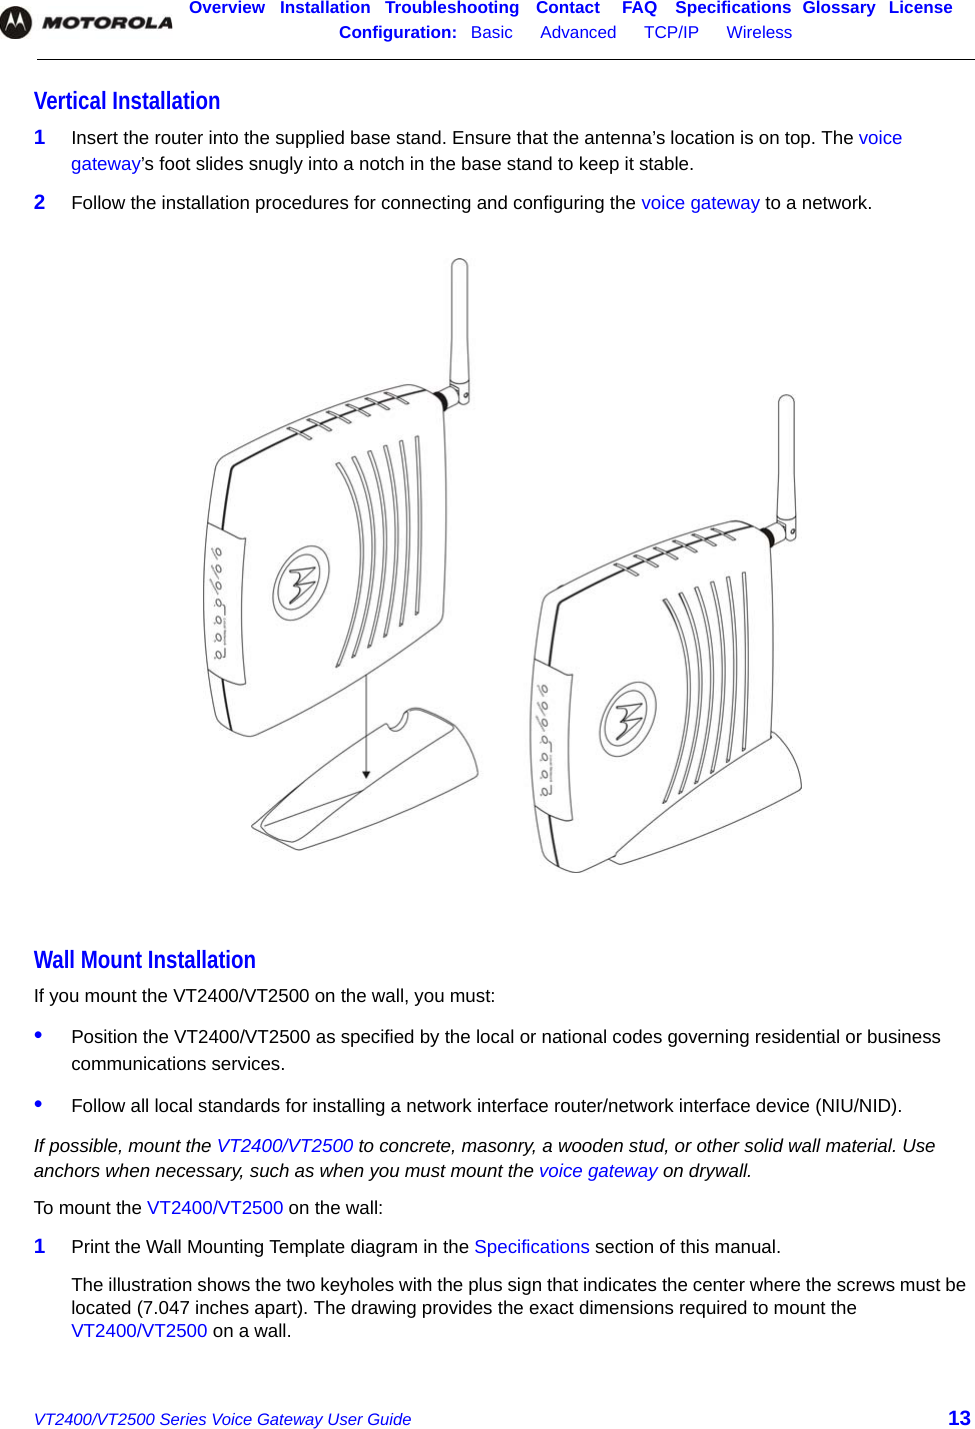 Overview Installation Troubleshooting Contact FAQ Specifications Glossary LicenseConfiguration:   Basic      Advanced      TCP/IP      Wireless    VT2400/VT2500 Series Voice Gateway User Guide 13Vertical Installation1Insert the router into the supplied base stand. Ensure that the antenna’s location is on top. The voice gateway’s foot slides snugly into a notch in the base stand to keep it stable.2Follow the installation procedures for connecting and configuring the voice gateway to a network.Wall Mount InstallationIf you mount the VT2400/VT2500 on the wall, you must:•Position the VT2400/VT2500 as specified by the local or national codes governing residential or business communications services.•Follow all local standards for installing a network interface router/network interface device (NIU/NID).If possible, mount the VT2400/VT2500 to concrete, masonry, a wooden stud, or other solid wall material. Use anchors when necessary, such as when you must mount the voice gateway on drywall.To mount the VT2400/VT2500 on the wall:1Print the Wall Mounting Template diagram in the Specifications section of this manual.The illustration shows the two keyholes with the plus sign that indicates the center where the screws must be located (7.047 inches apart). The drawing provides the exact dimensions required to mount the VT2400/VT2500 on a wall. 